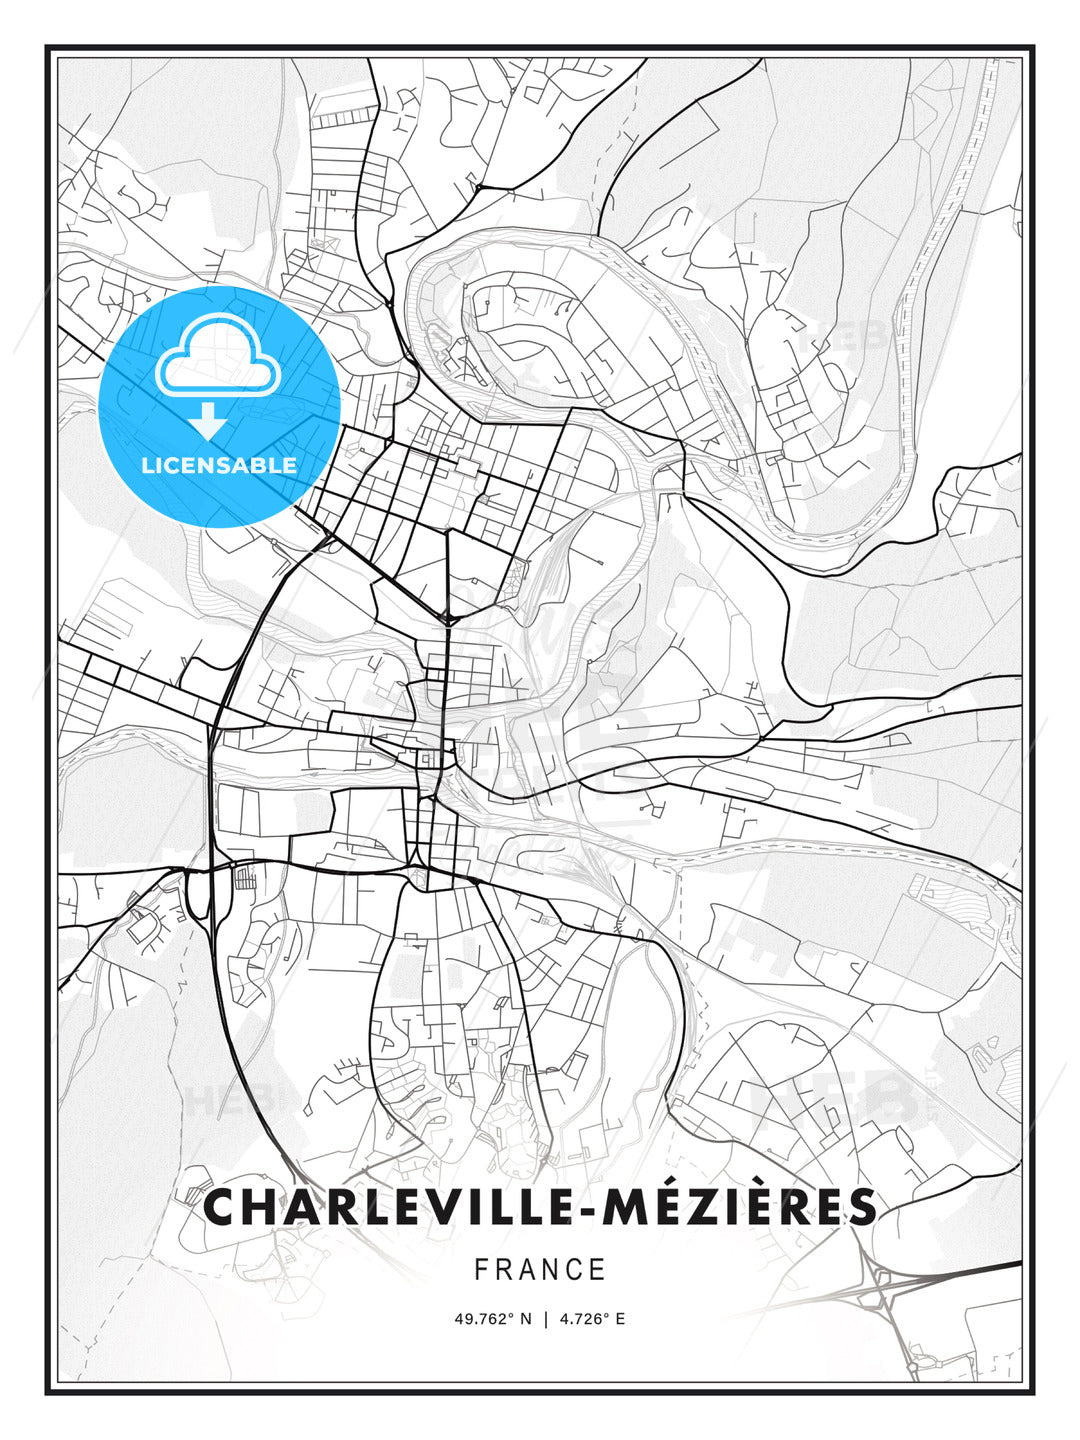 Charleville-Mézières, France, Modern Print Template in Various Formats - HEBSTREITS Sketches